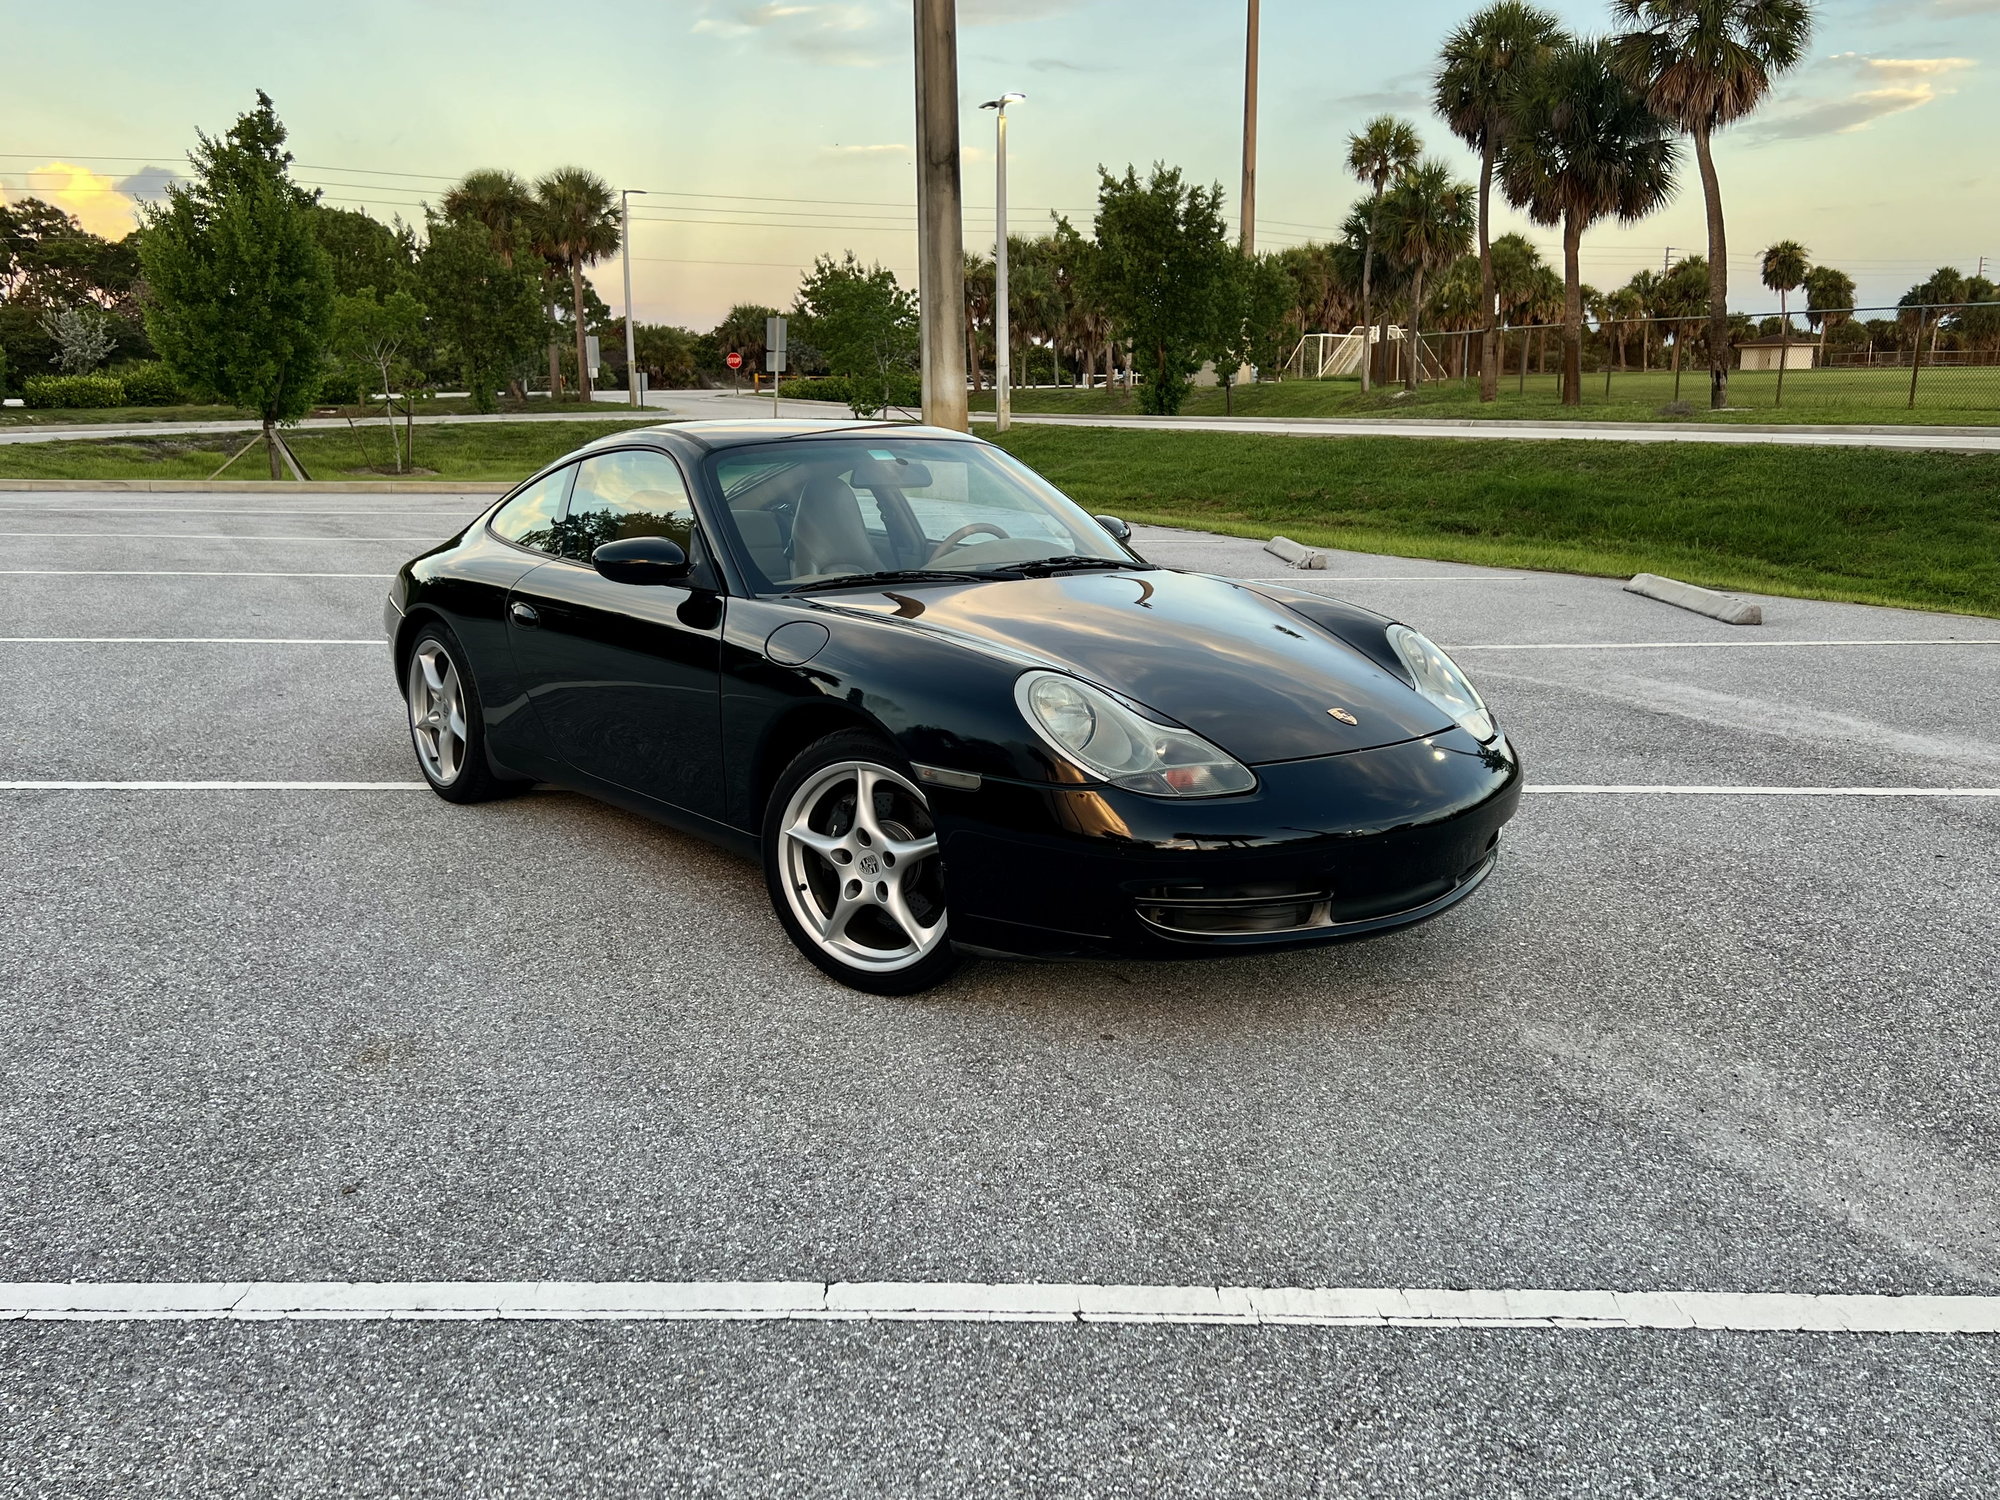 1999 Porsche 911 - Black 99 C2 6Spd 108k mi - IMS done - Clean title - South FL - Used - VIN WP0AA2992XS626517 - 108,500 Miles - 6 cyl - 2WD - Manual - Coupe - Black - North Palm Beach, FL 33408, United States